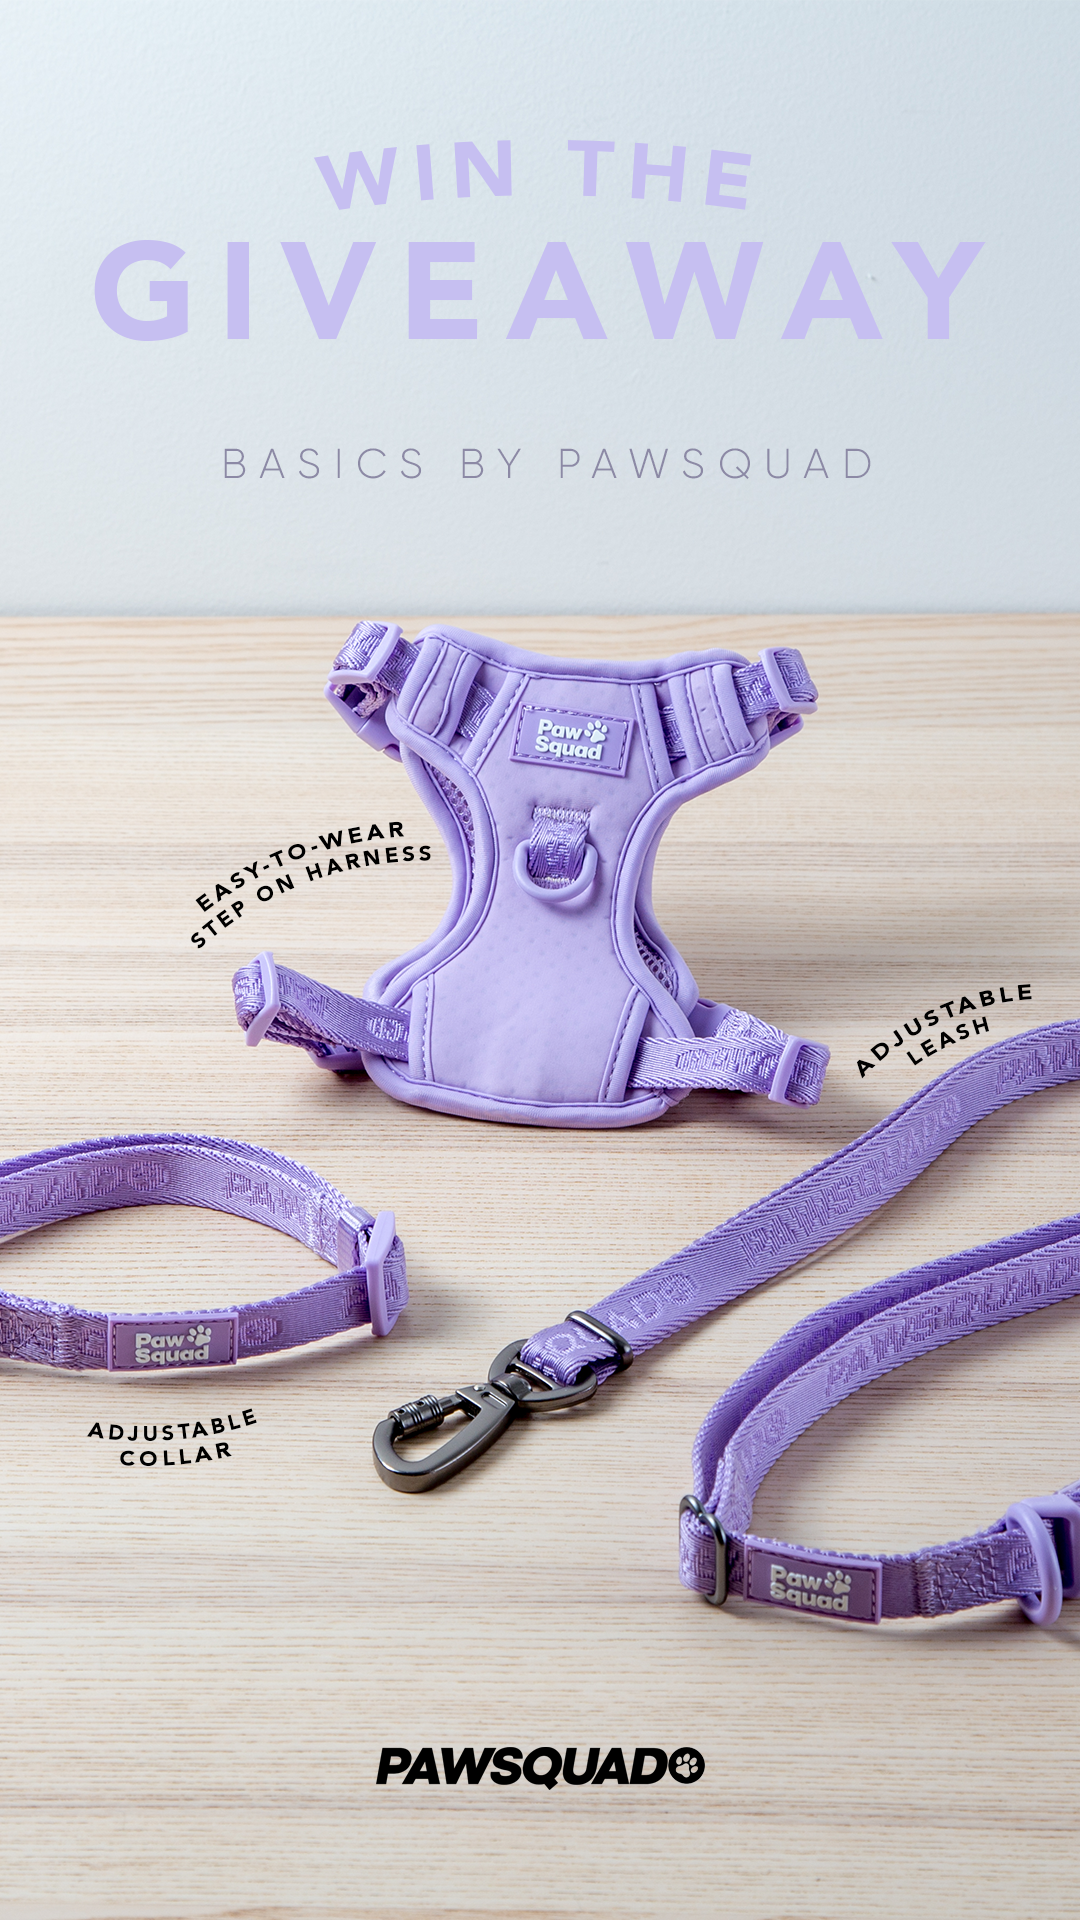 Celebrate simplicity with our Basics by PAWSQUAD giveaway!